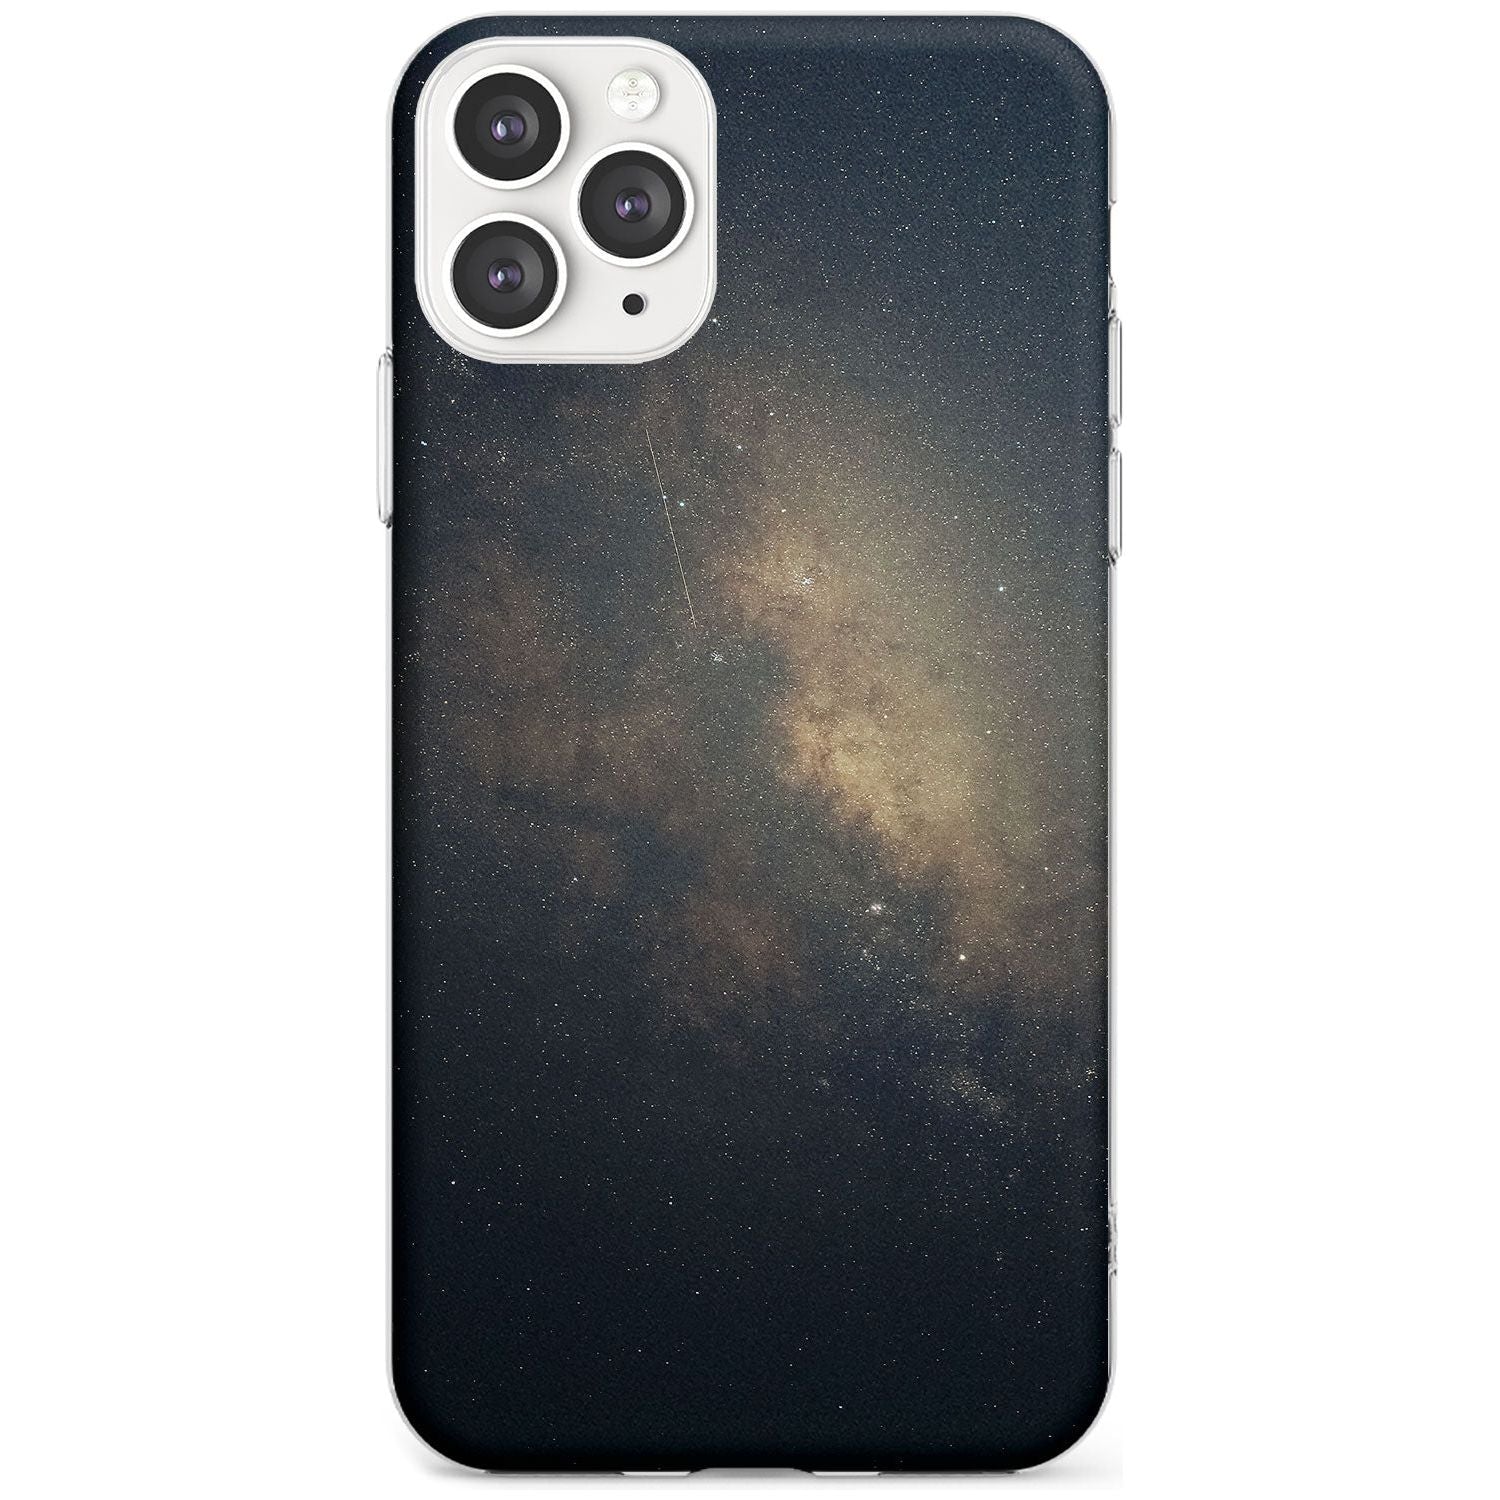 Night Sky Photograph Slim TPU Phone Case for iPhone 11 Pro Max